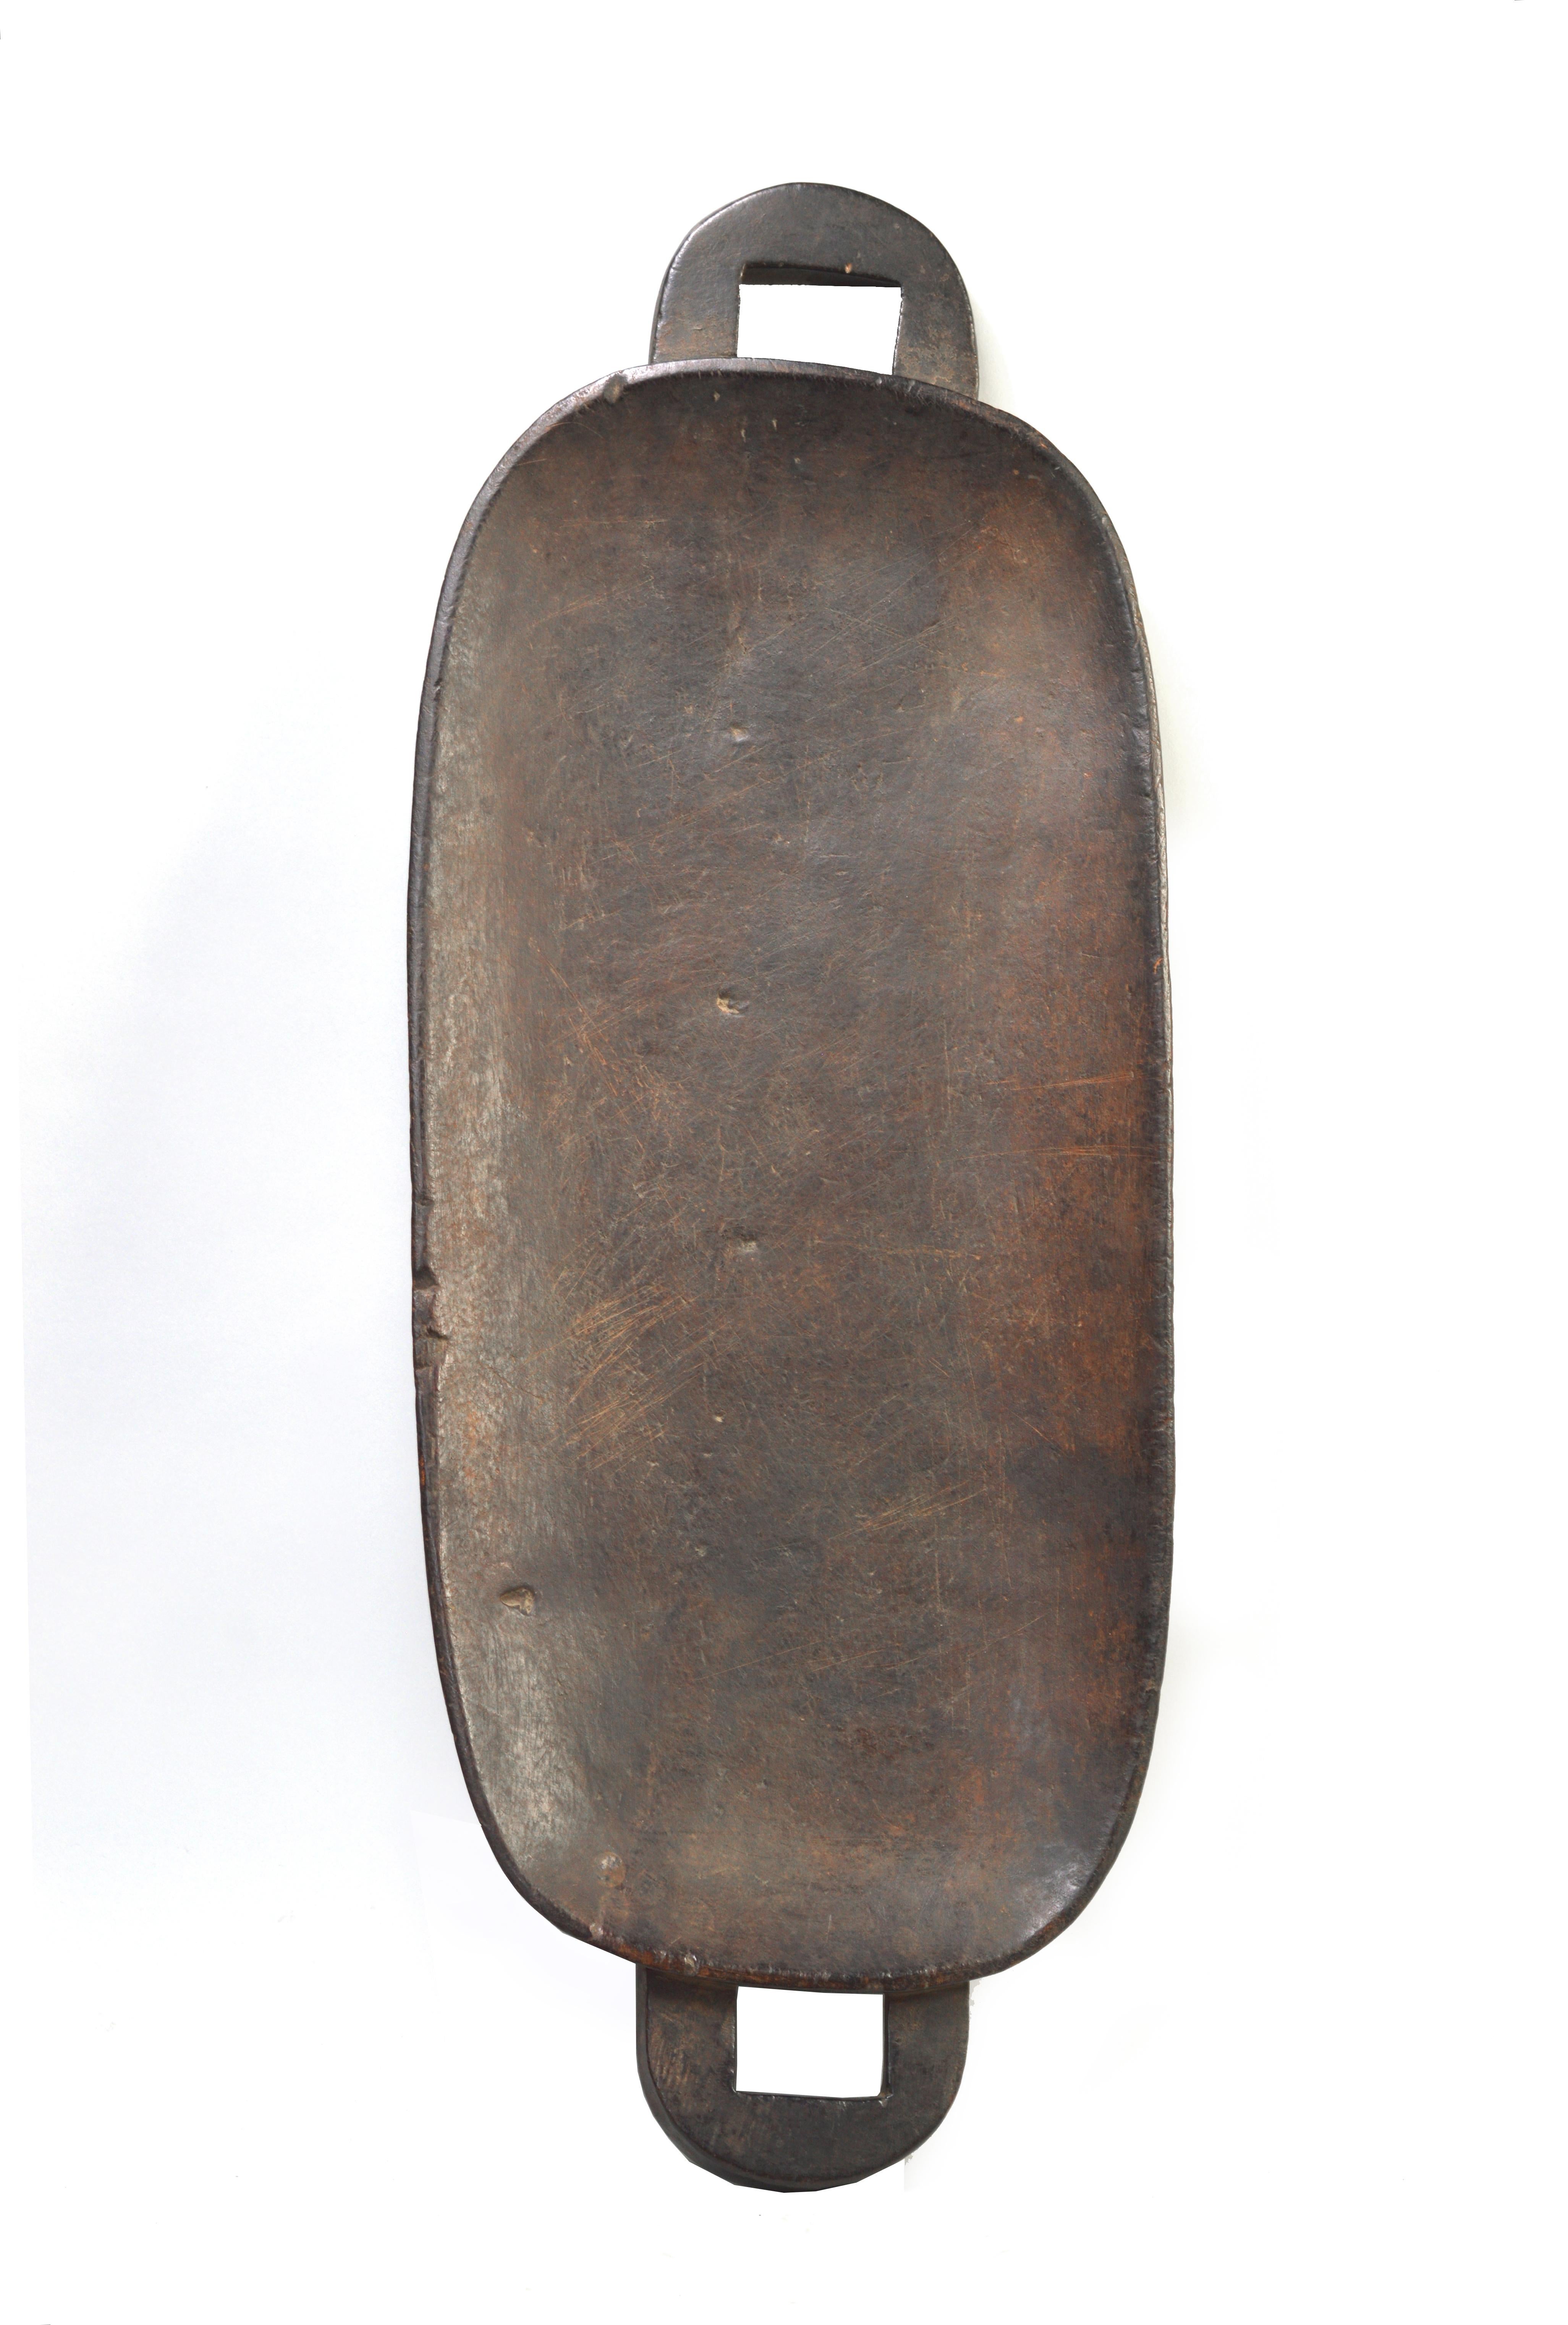 Zulu meat platters, called ugqoko in Zulu, are used at ceremonial gatherings for the carving and serving of meat from ritually-slaughtered livestock. The distinctive double platter form of this ugqoko serves as a mnemonic device that helps